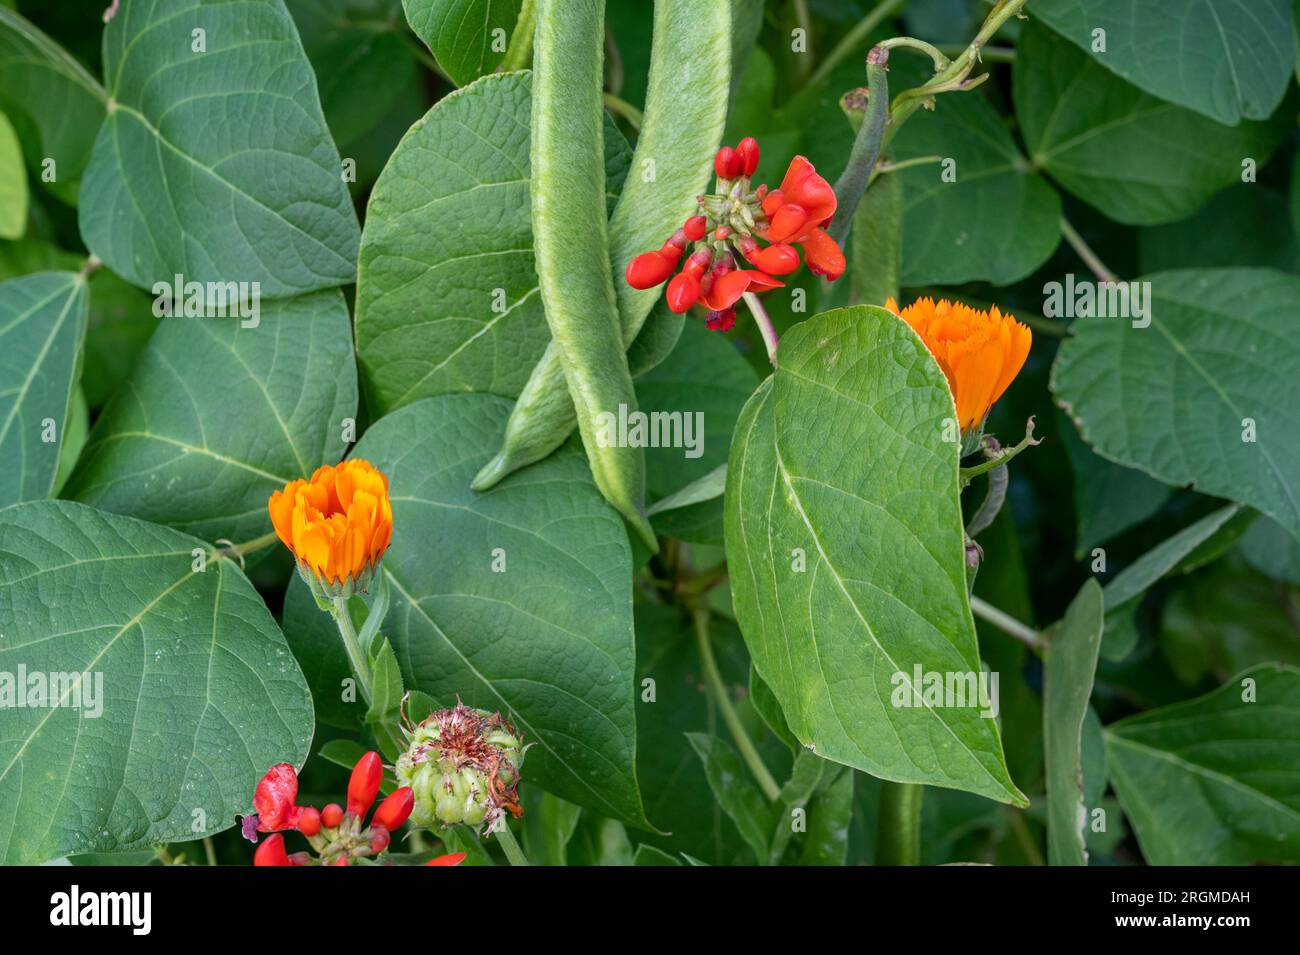 Calendula officinalis (marigold) planted with runner beans as a companion plant can lure aphids away and attract beneficial insects such as ladybirds. Stock Photo